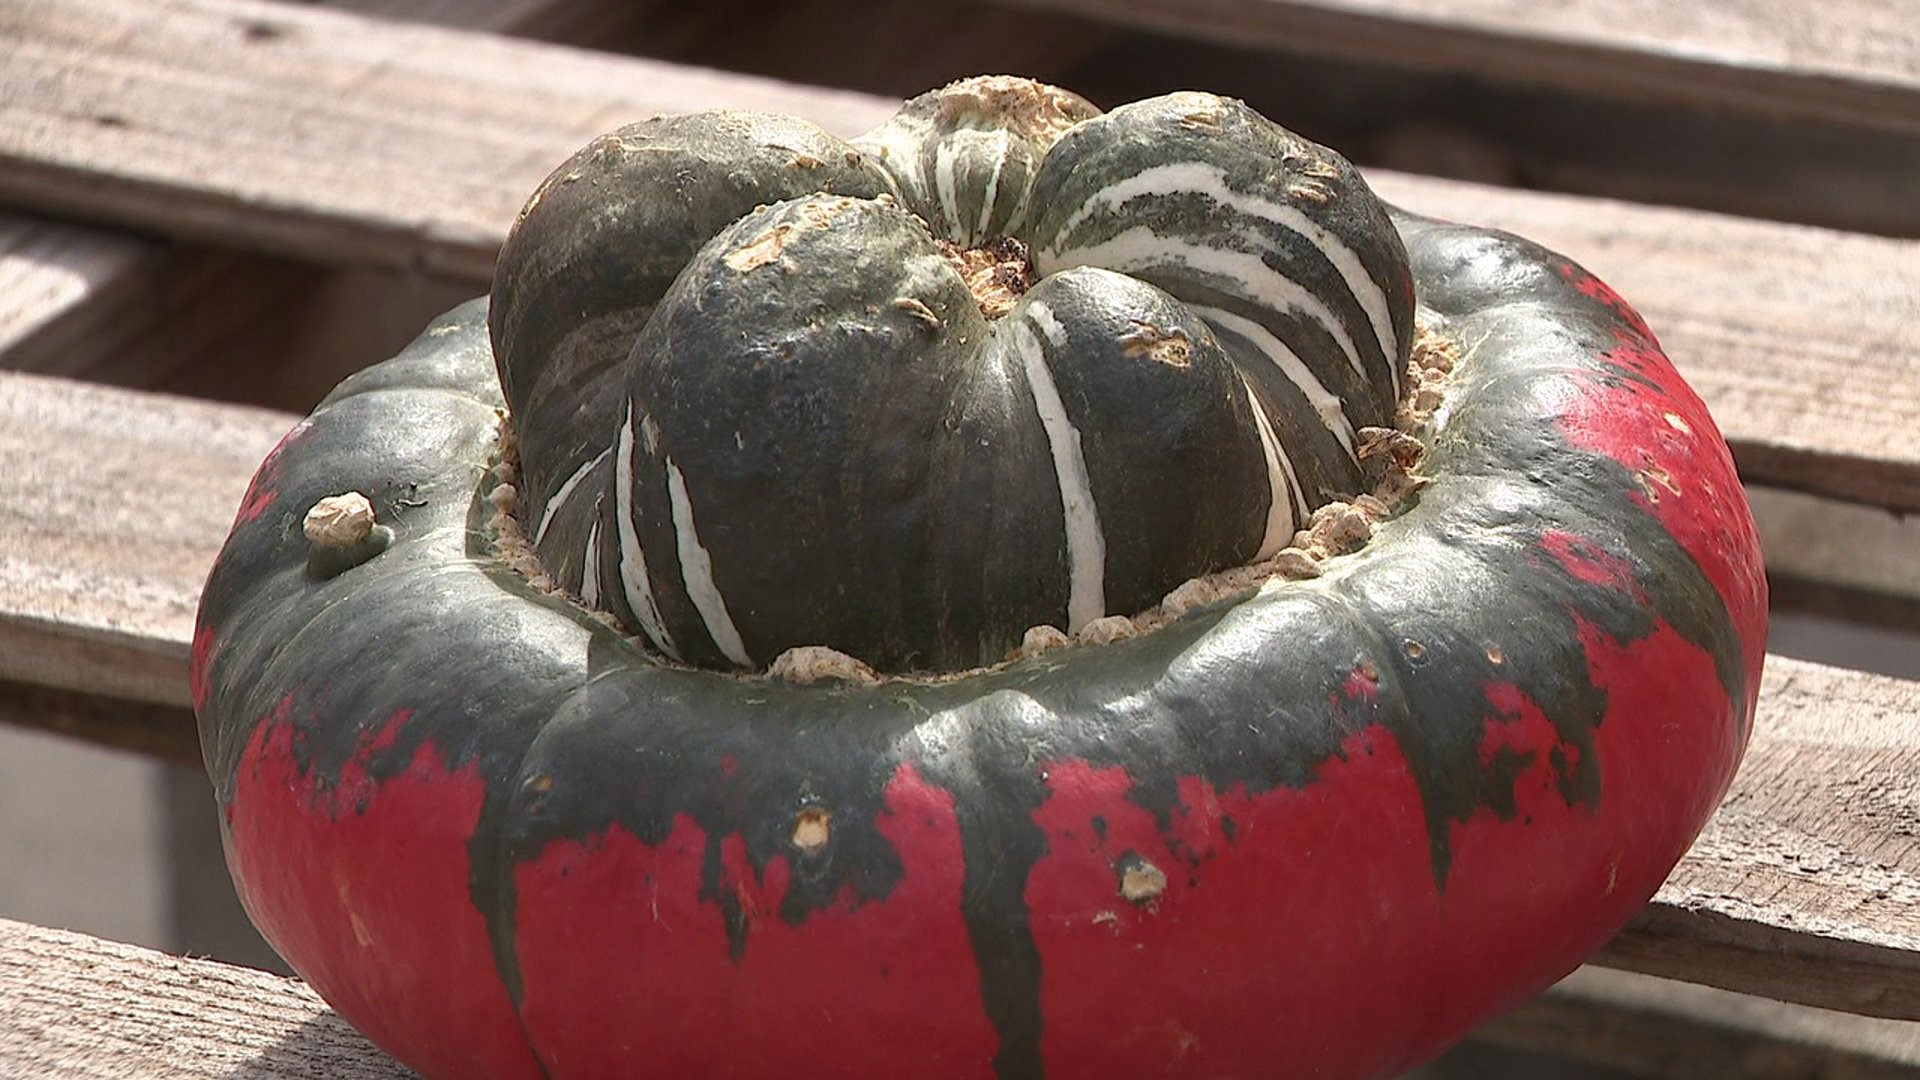 Ghastly gourds growing in popularity